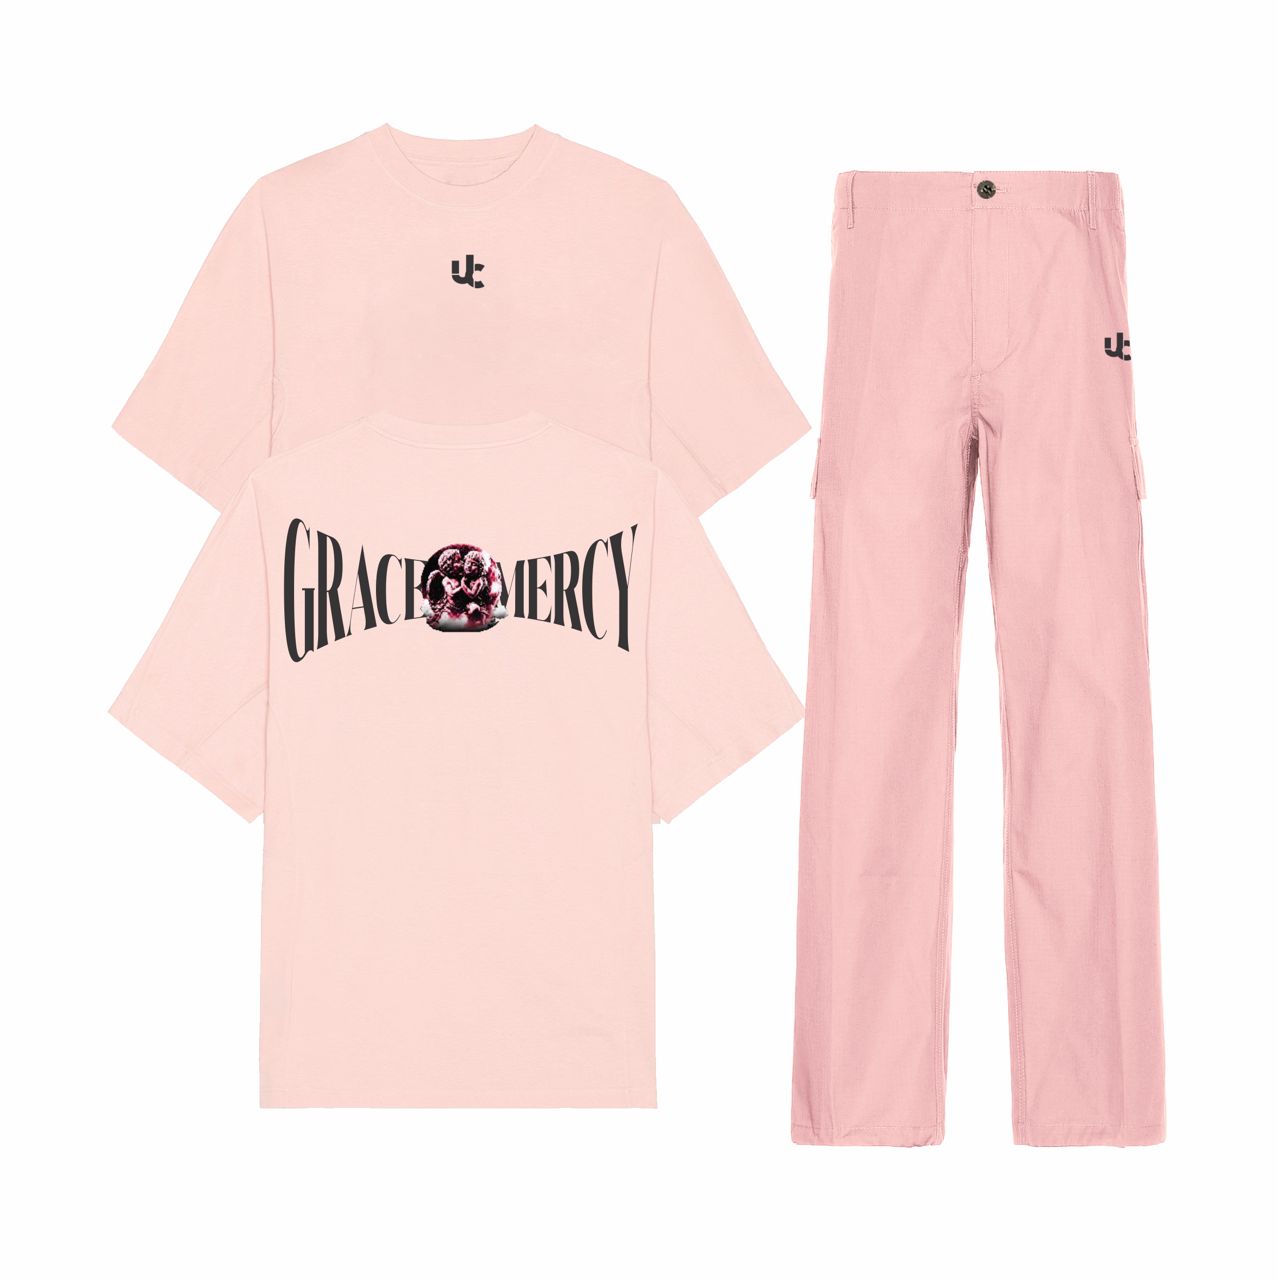 Grace&Mercy Tee and Pants